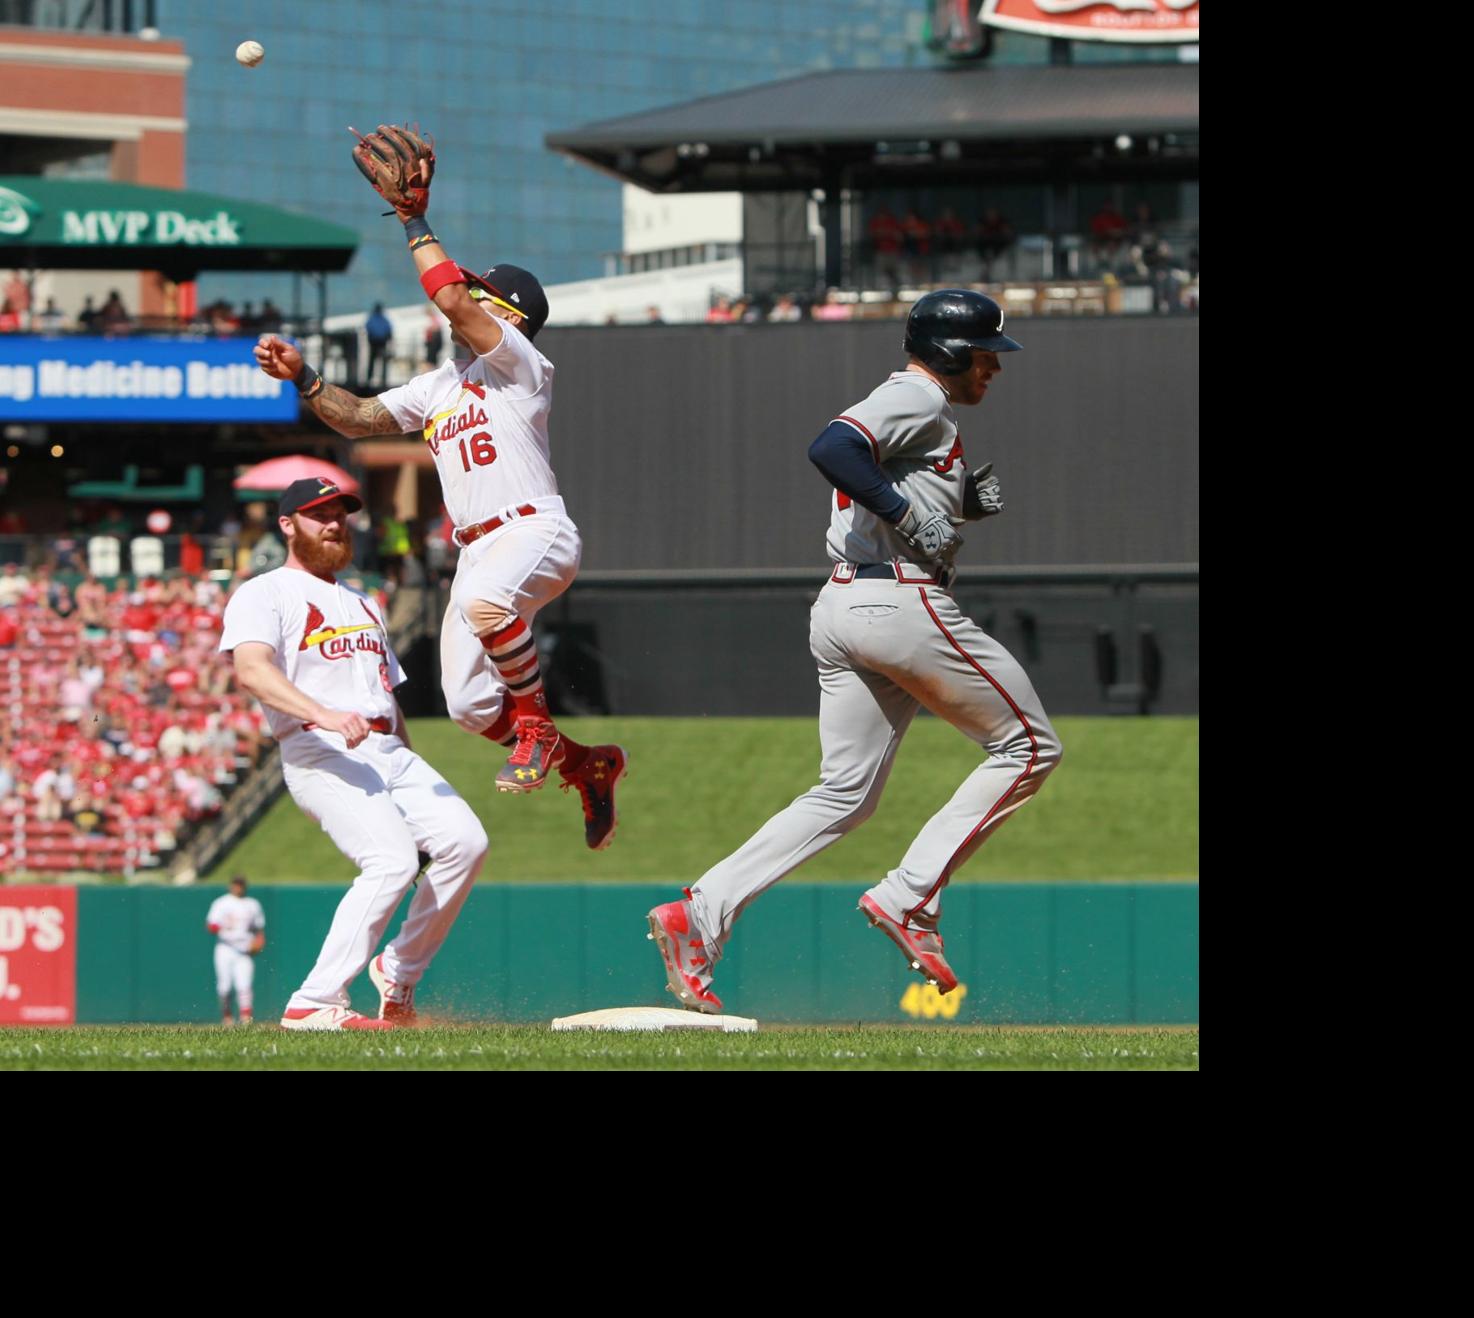 Mistake-prone Cards knuckle under to Braves | St. Louis Cardinals | 0